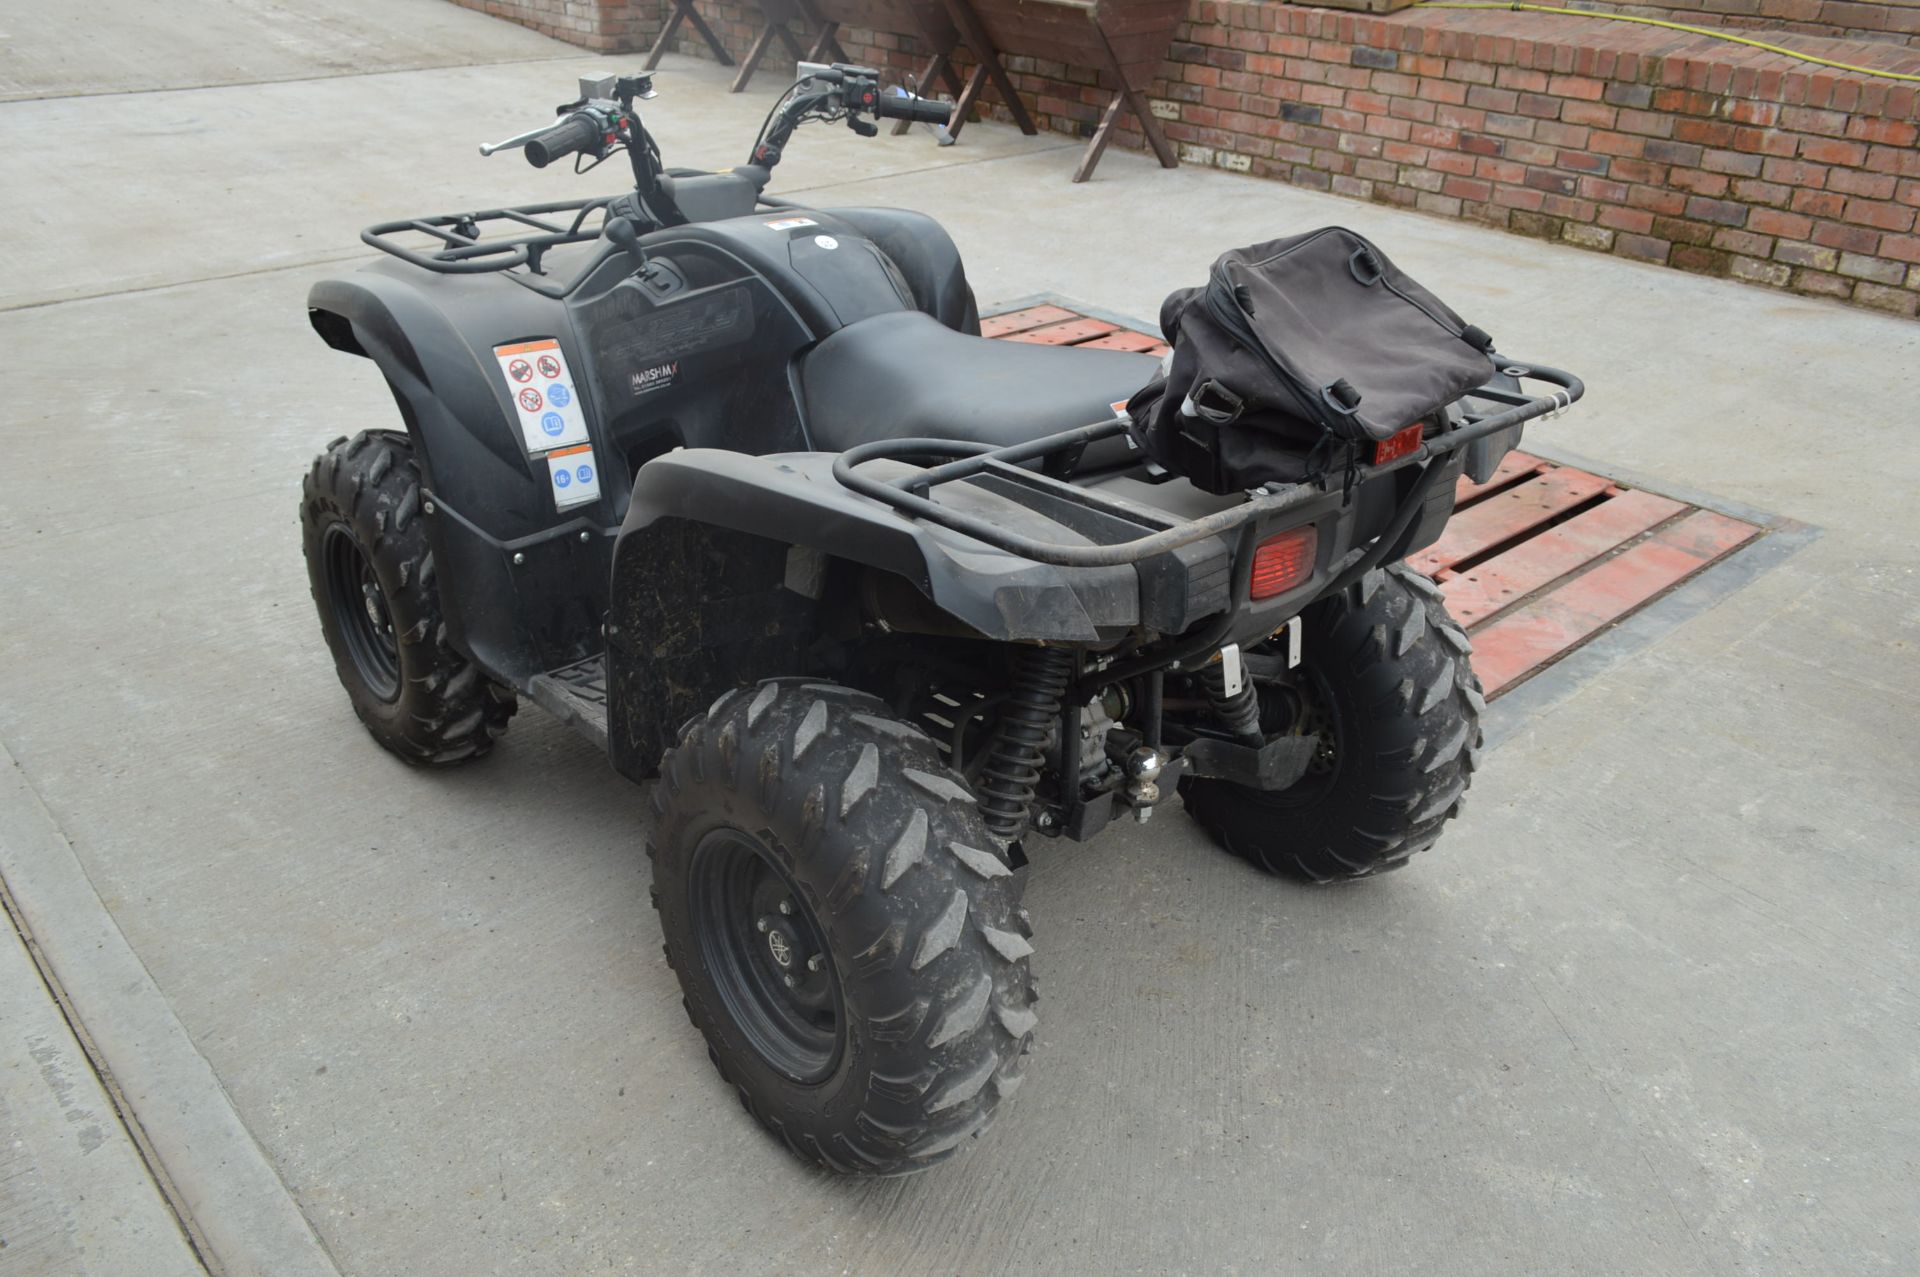 Yamaha GRIZZLY 700 SPECIAL EDITION ATV QUAD, registration no. CN64 AKO, date first registered 07/ - Image 3 of 5